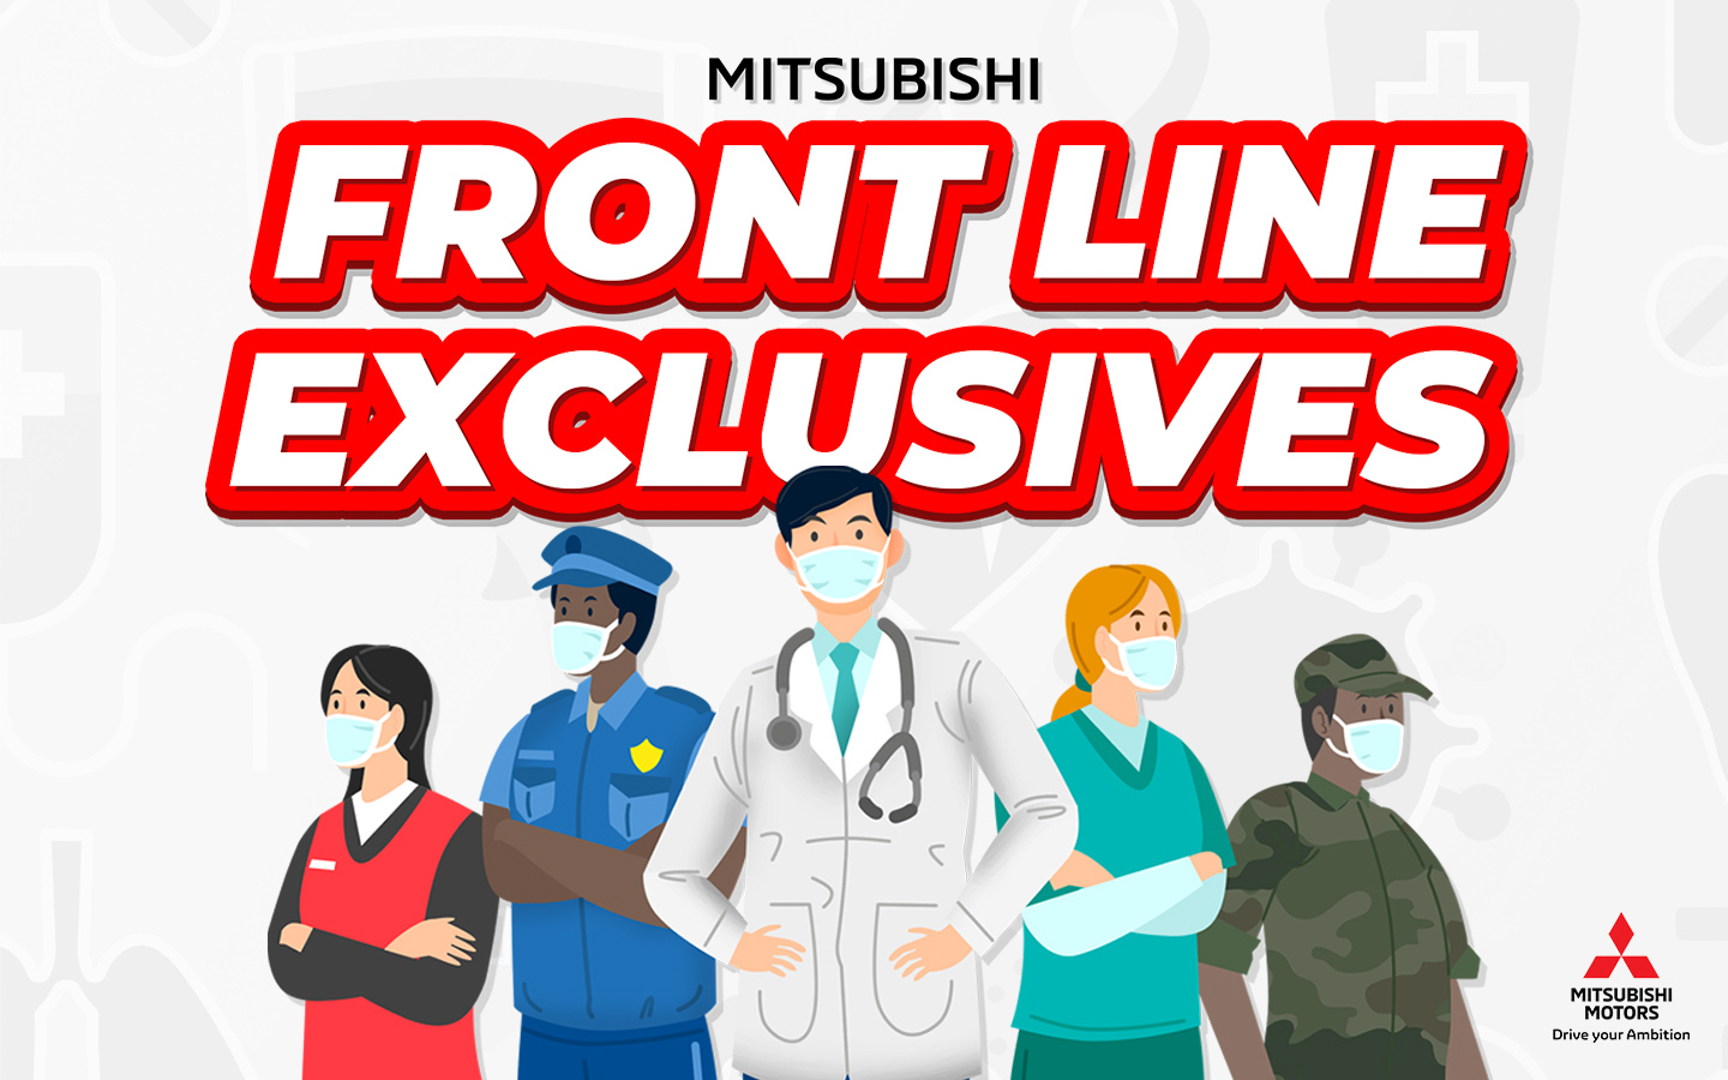 Mitsubishi Motors offers exclusive discounts for Front liners through its Front Line Exclusive Promo